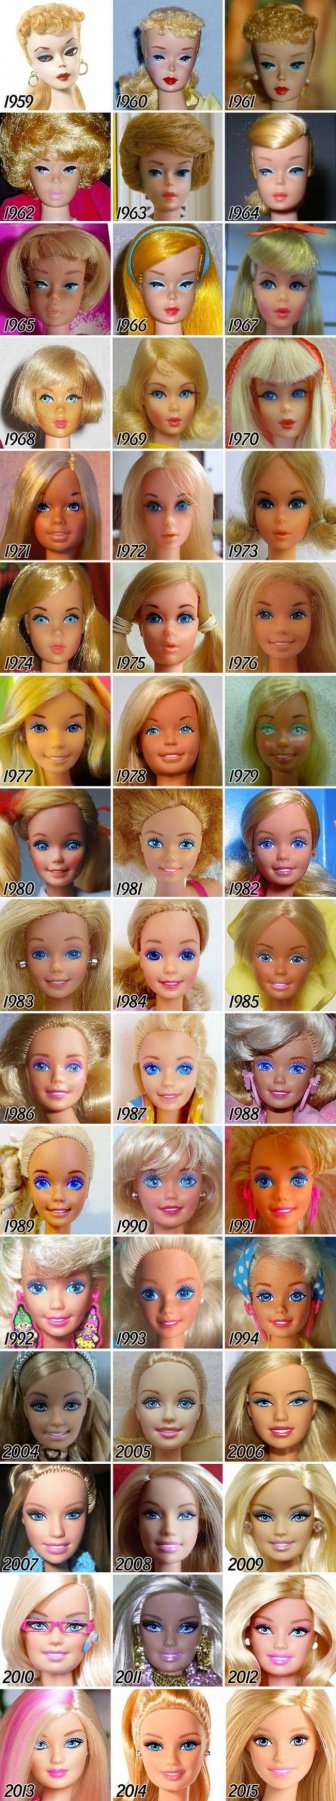 Looking Back On The Evolution Of Barbie